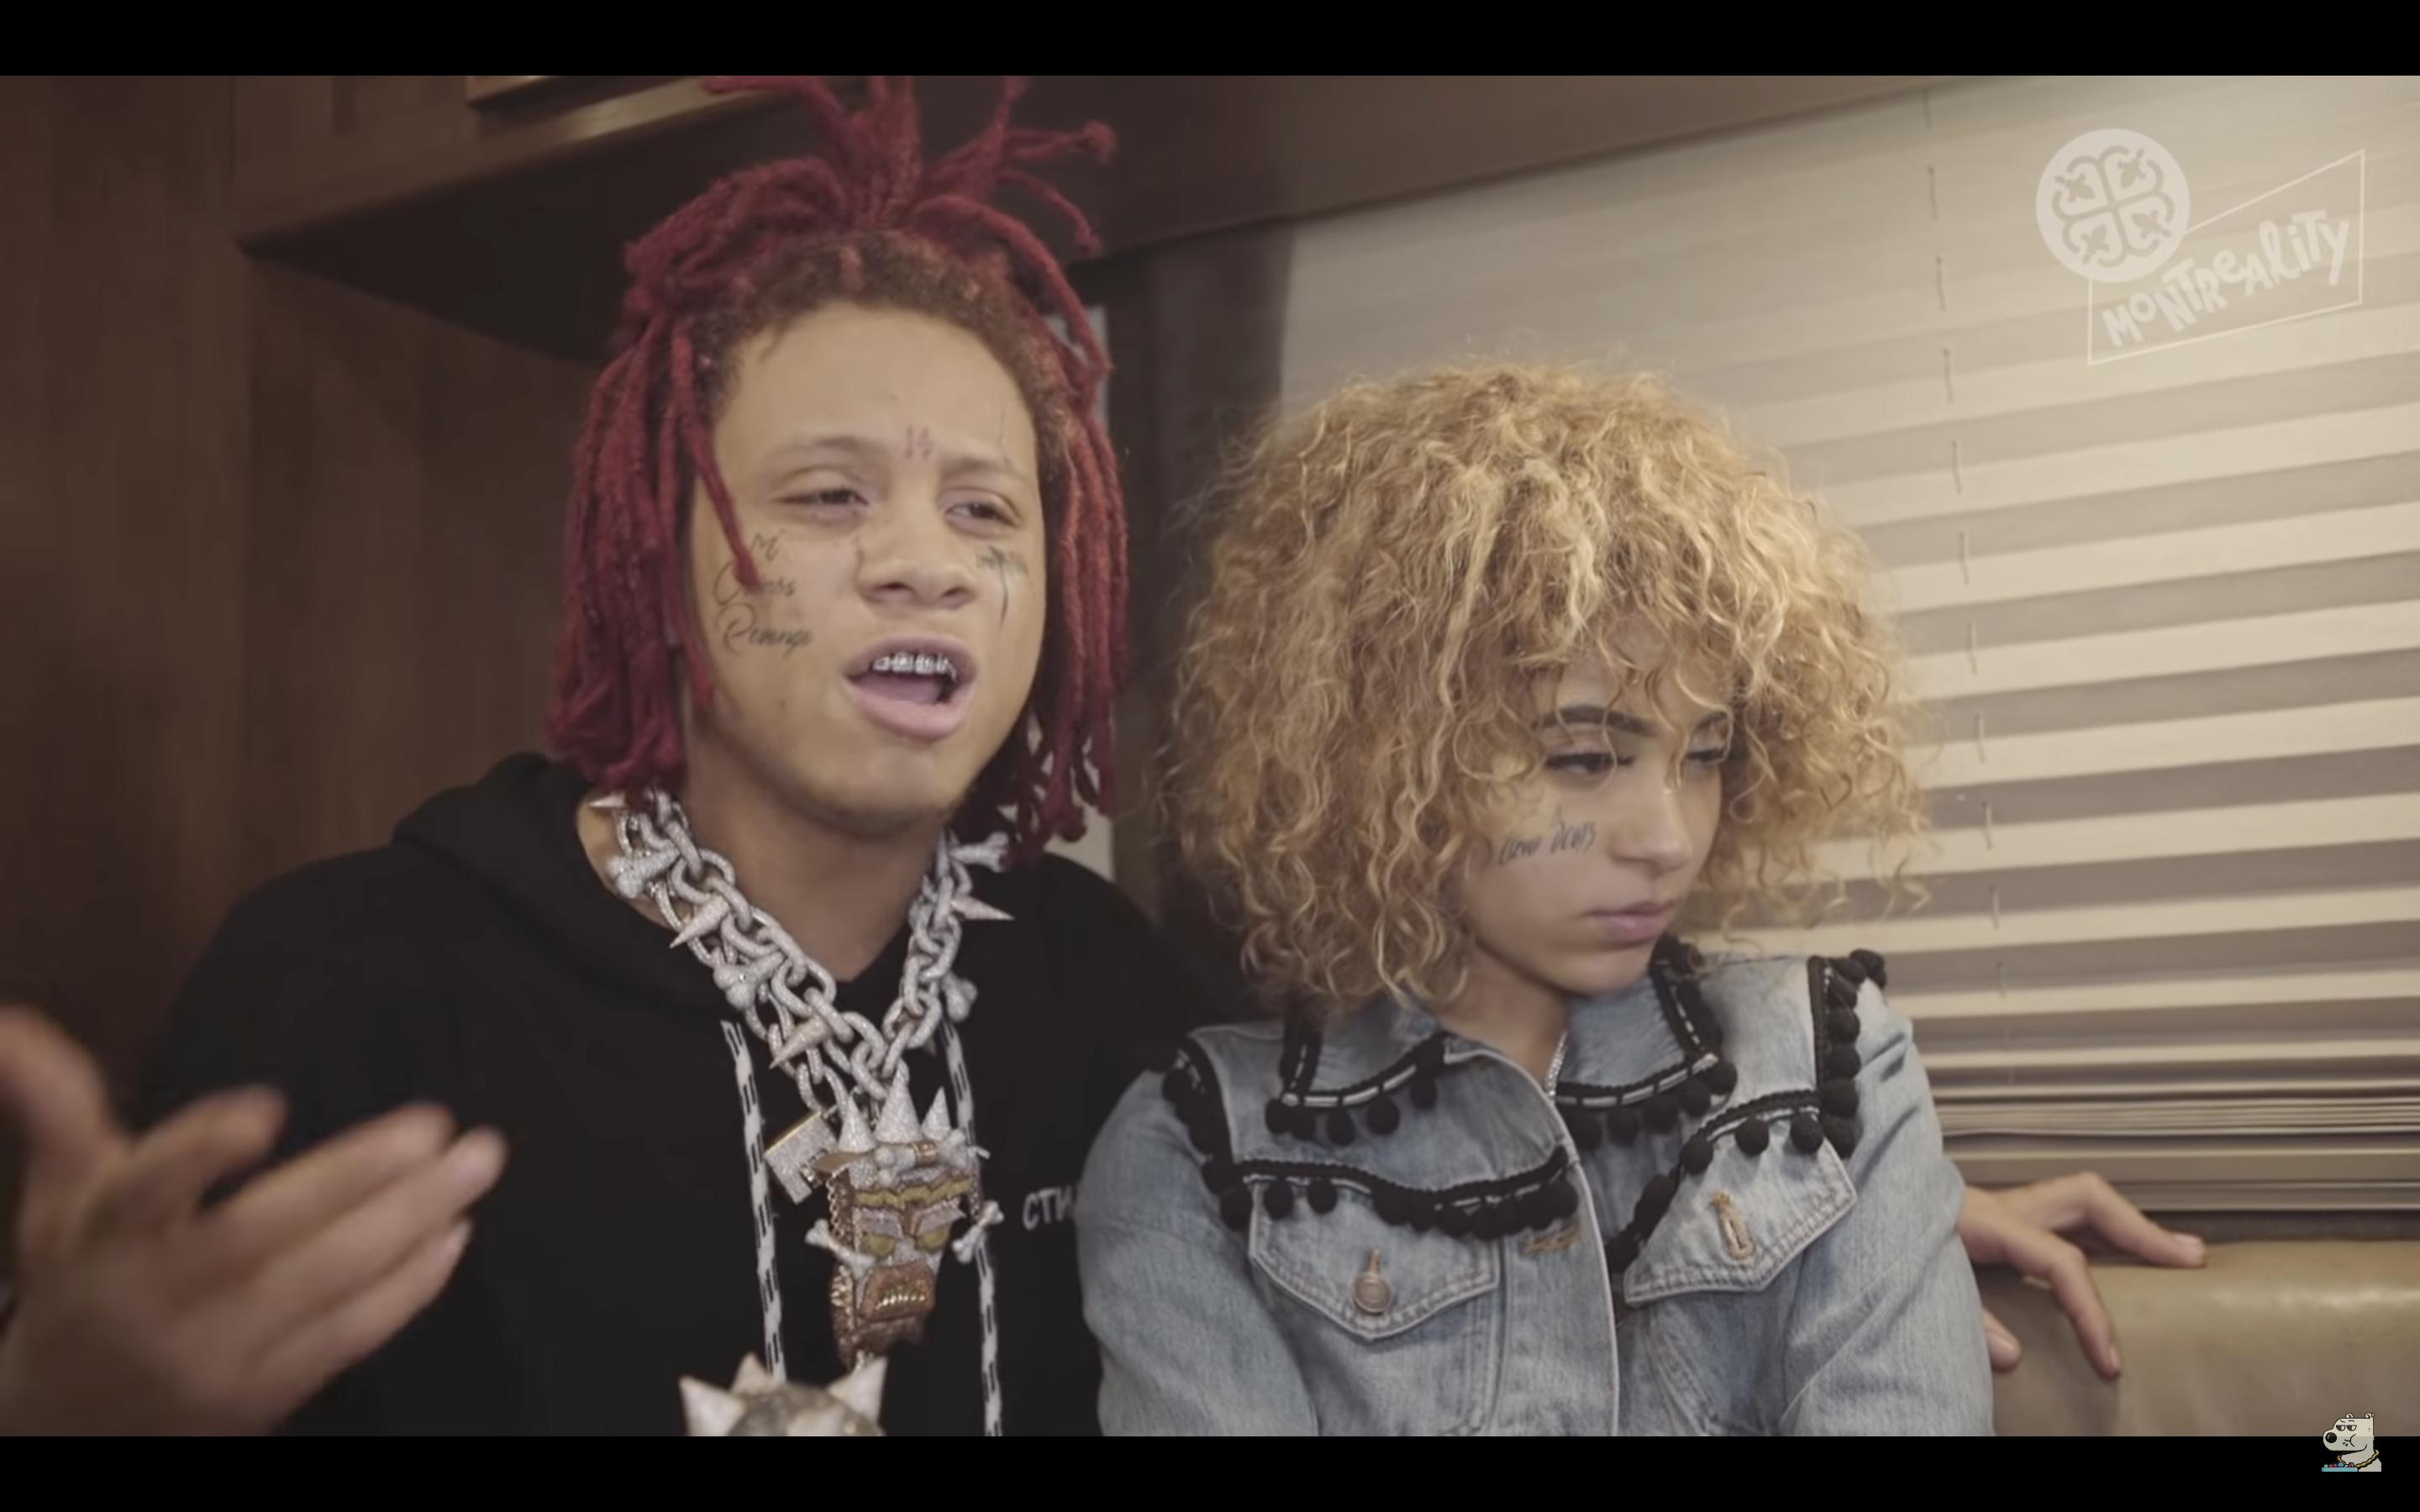 Trippie Redd and Aylek$ during an interview with MONTREALITY. | Source: YouTube/@MONTREALITY